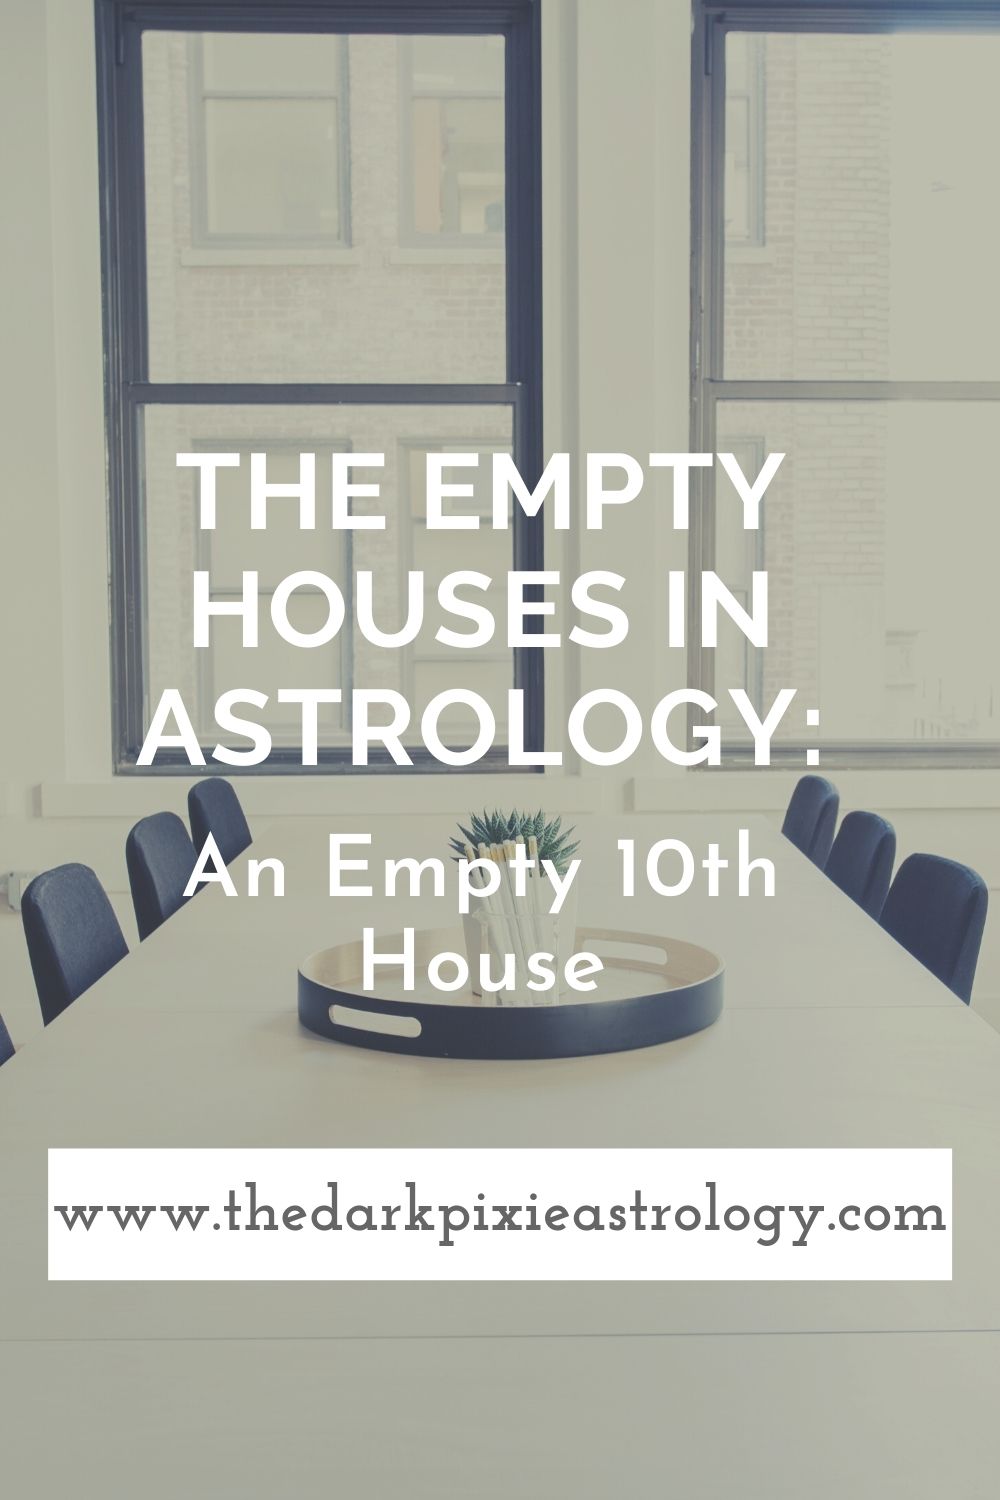 what does empty 7th house mean